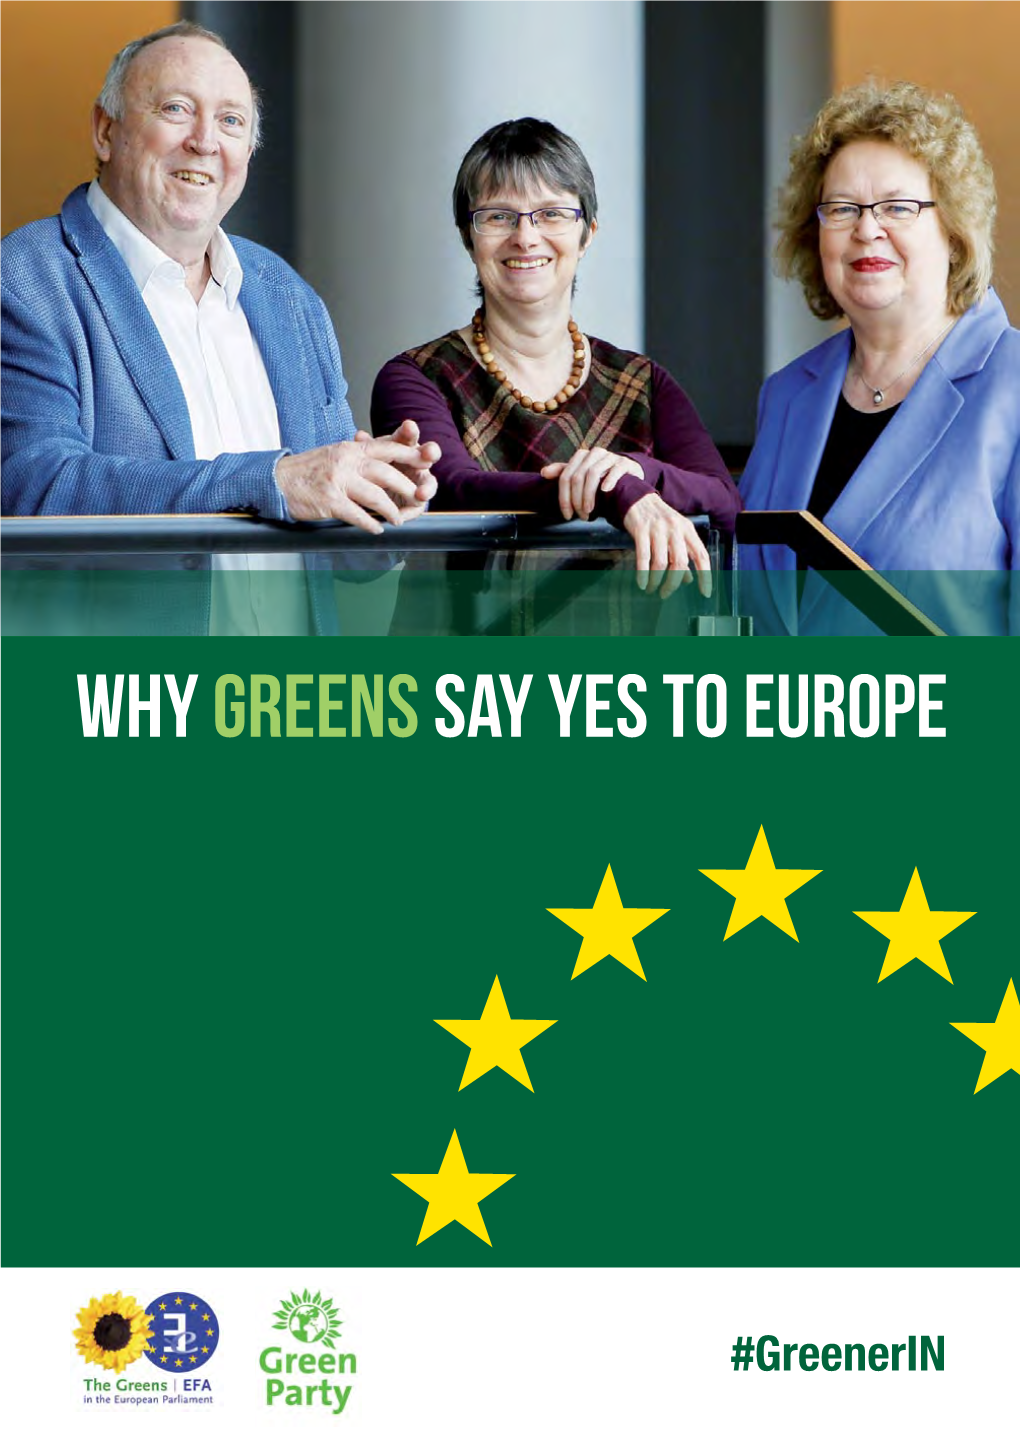 Whygreenssay Yes to Europe